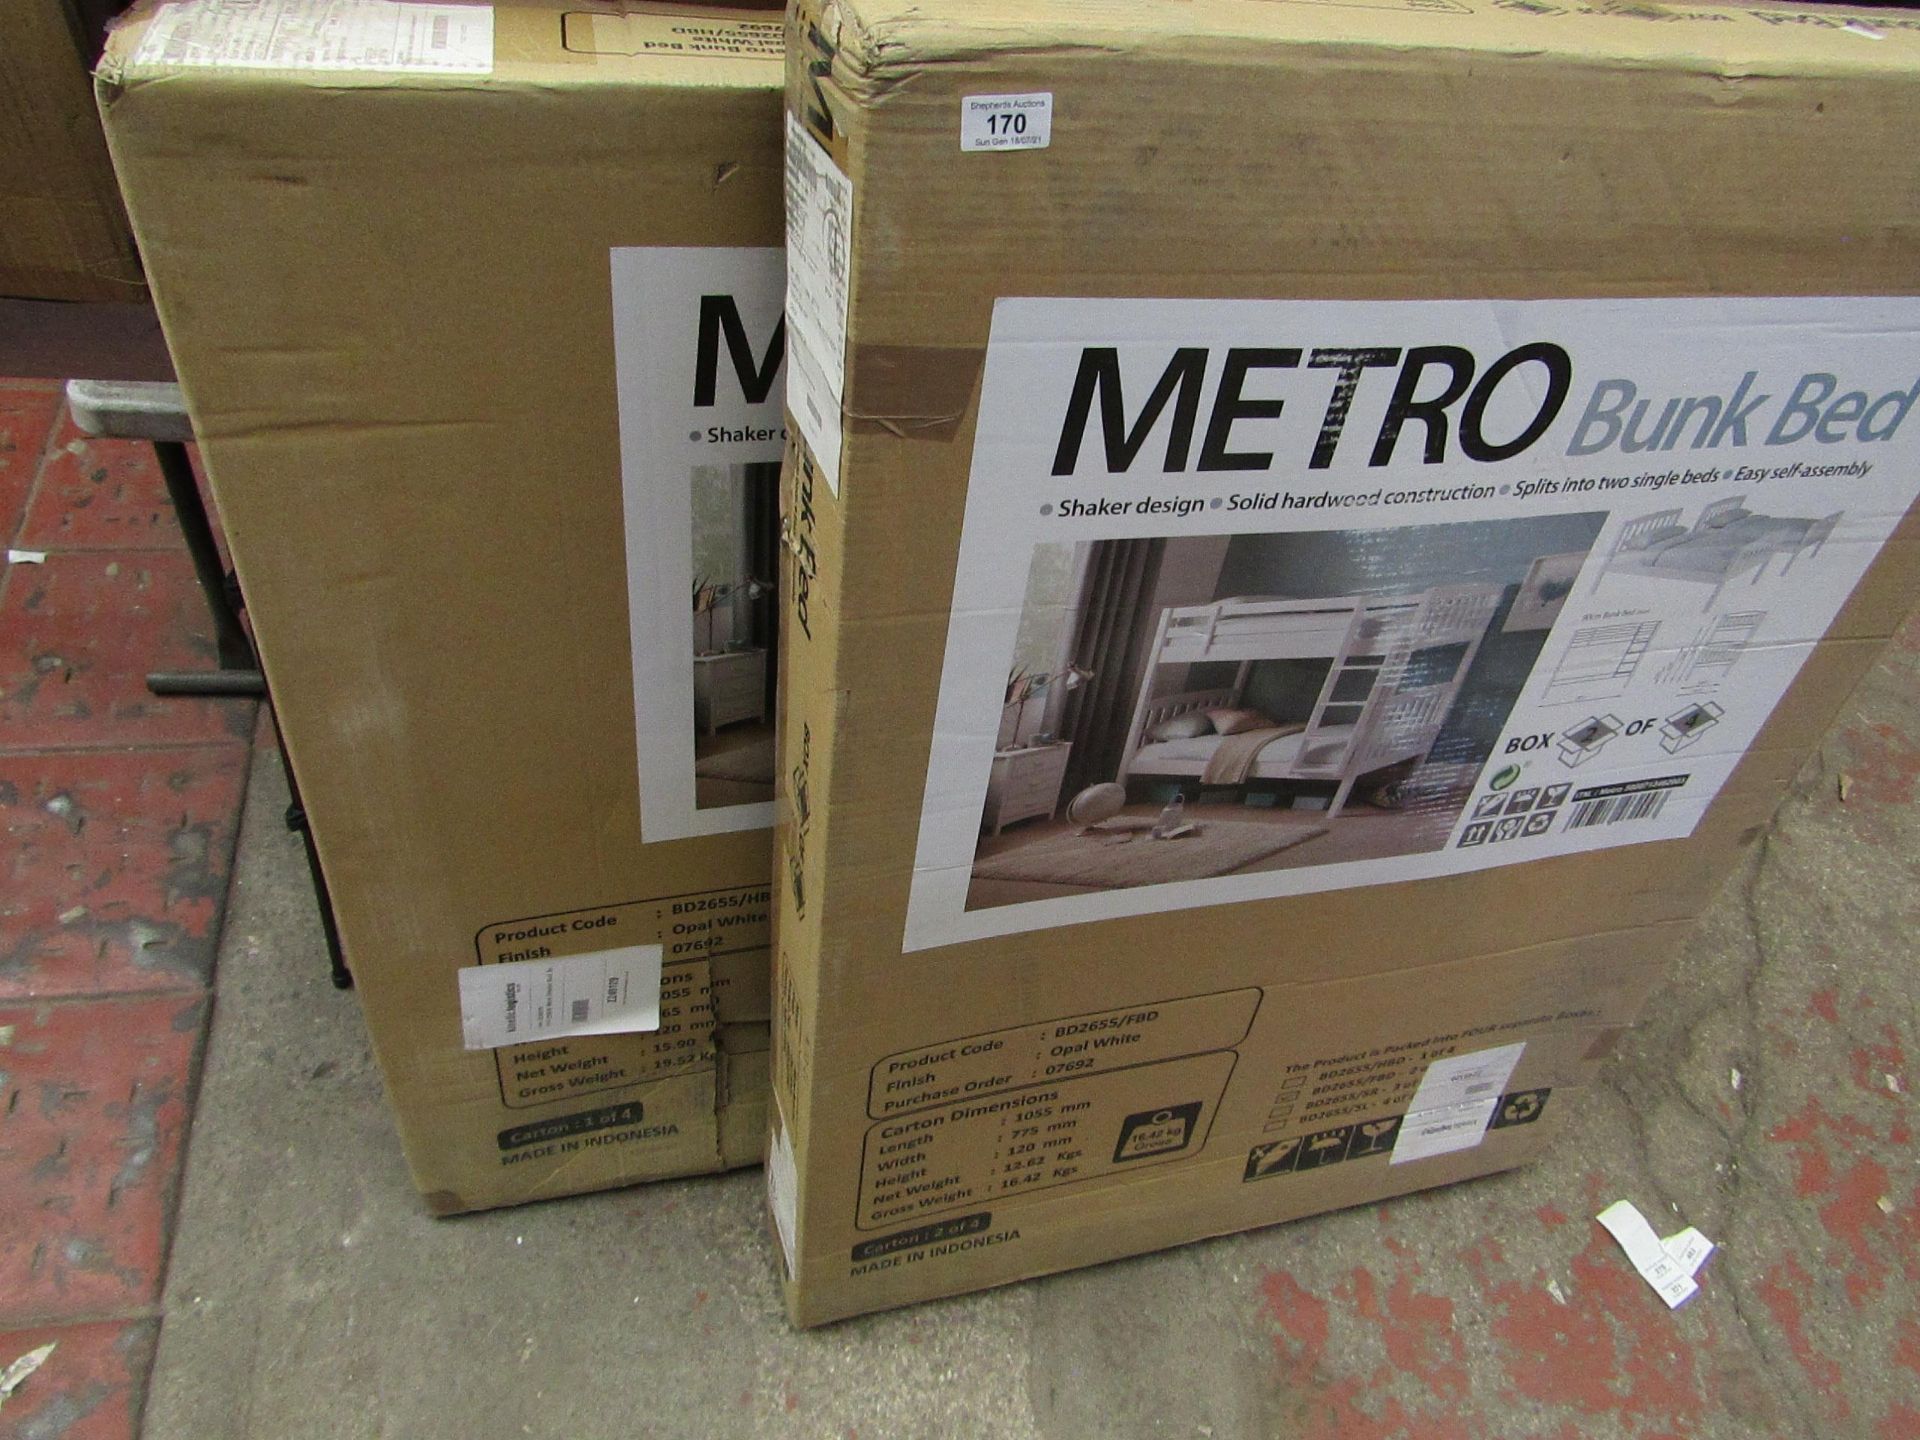 costco metro bunk bed - we have part 1 & 2 but we don?t have part 3 & 4 - unchecked & boxed.